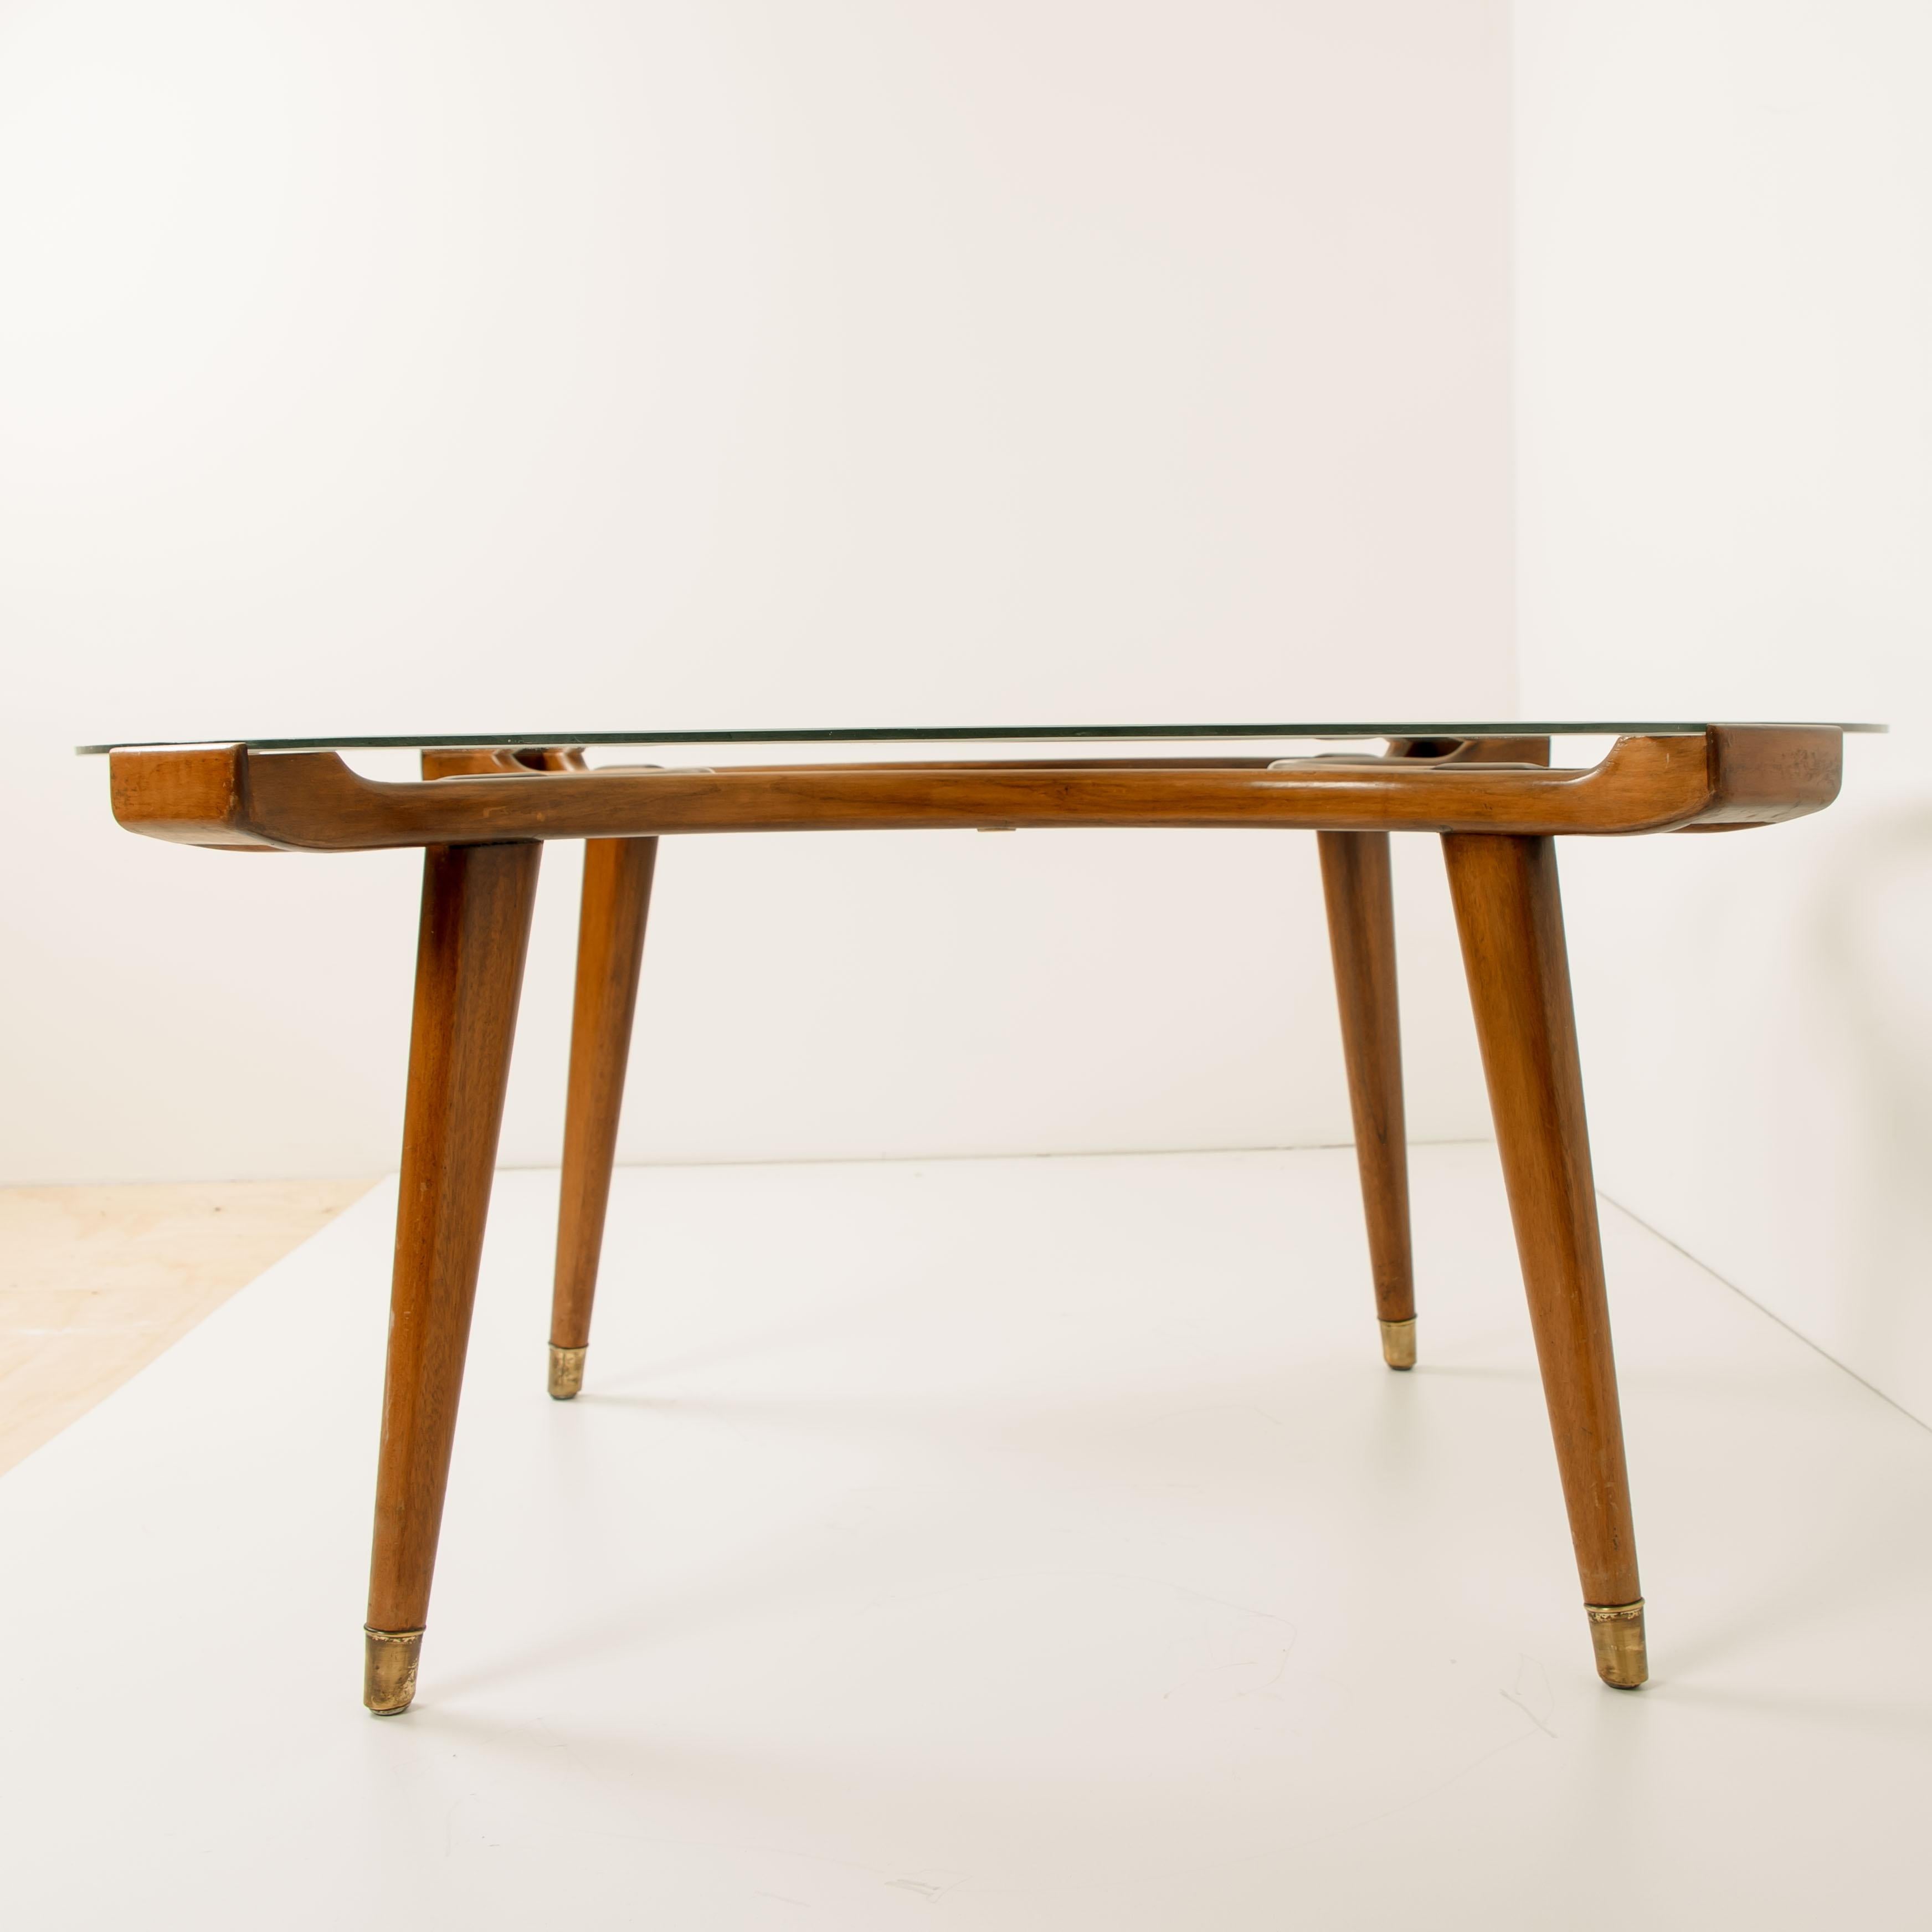 Solid Brass Walnut Glass Table, by William Watting, Produced by Fristho, 1950s For Sale 4